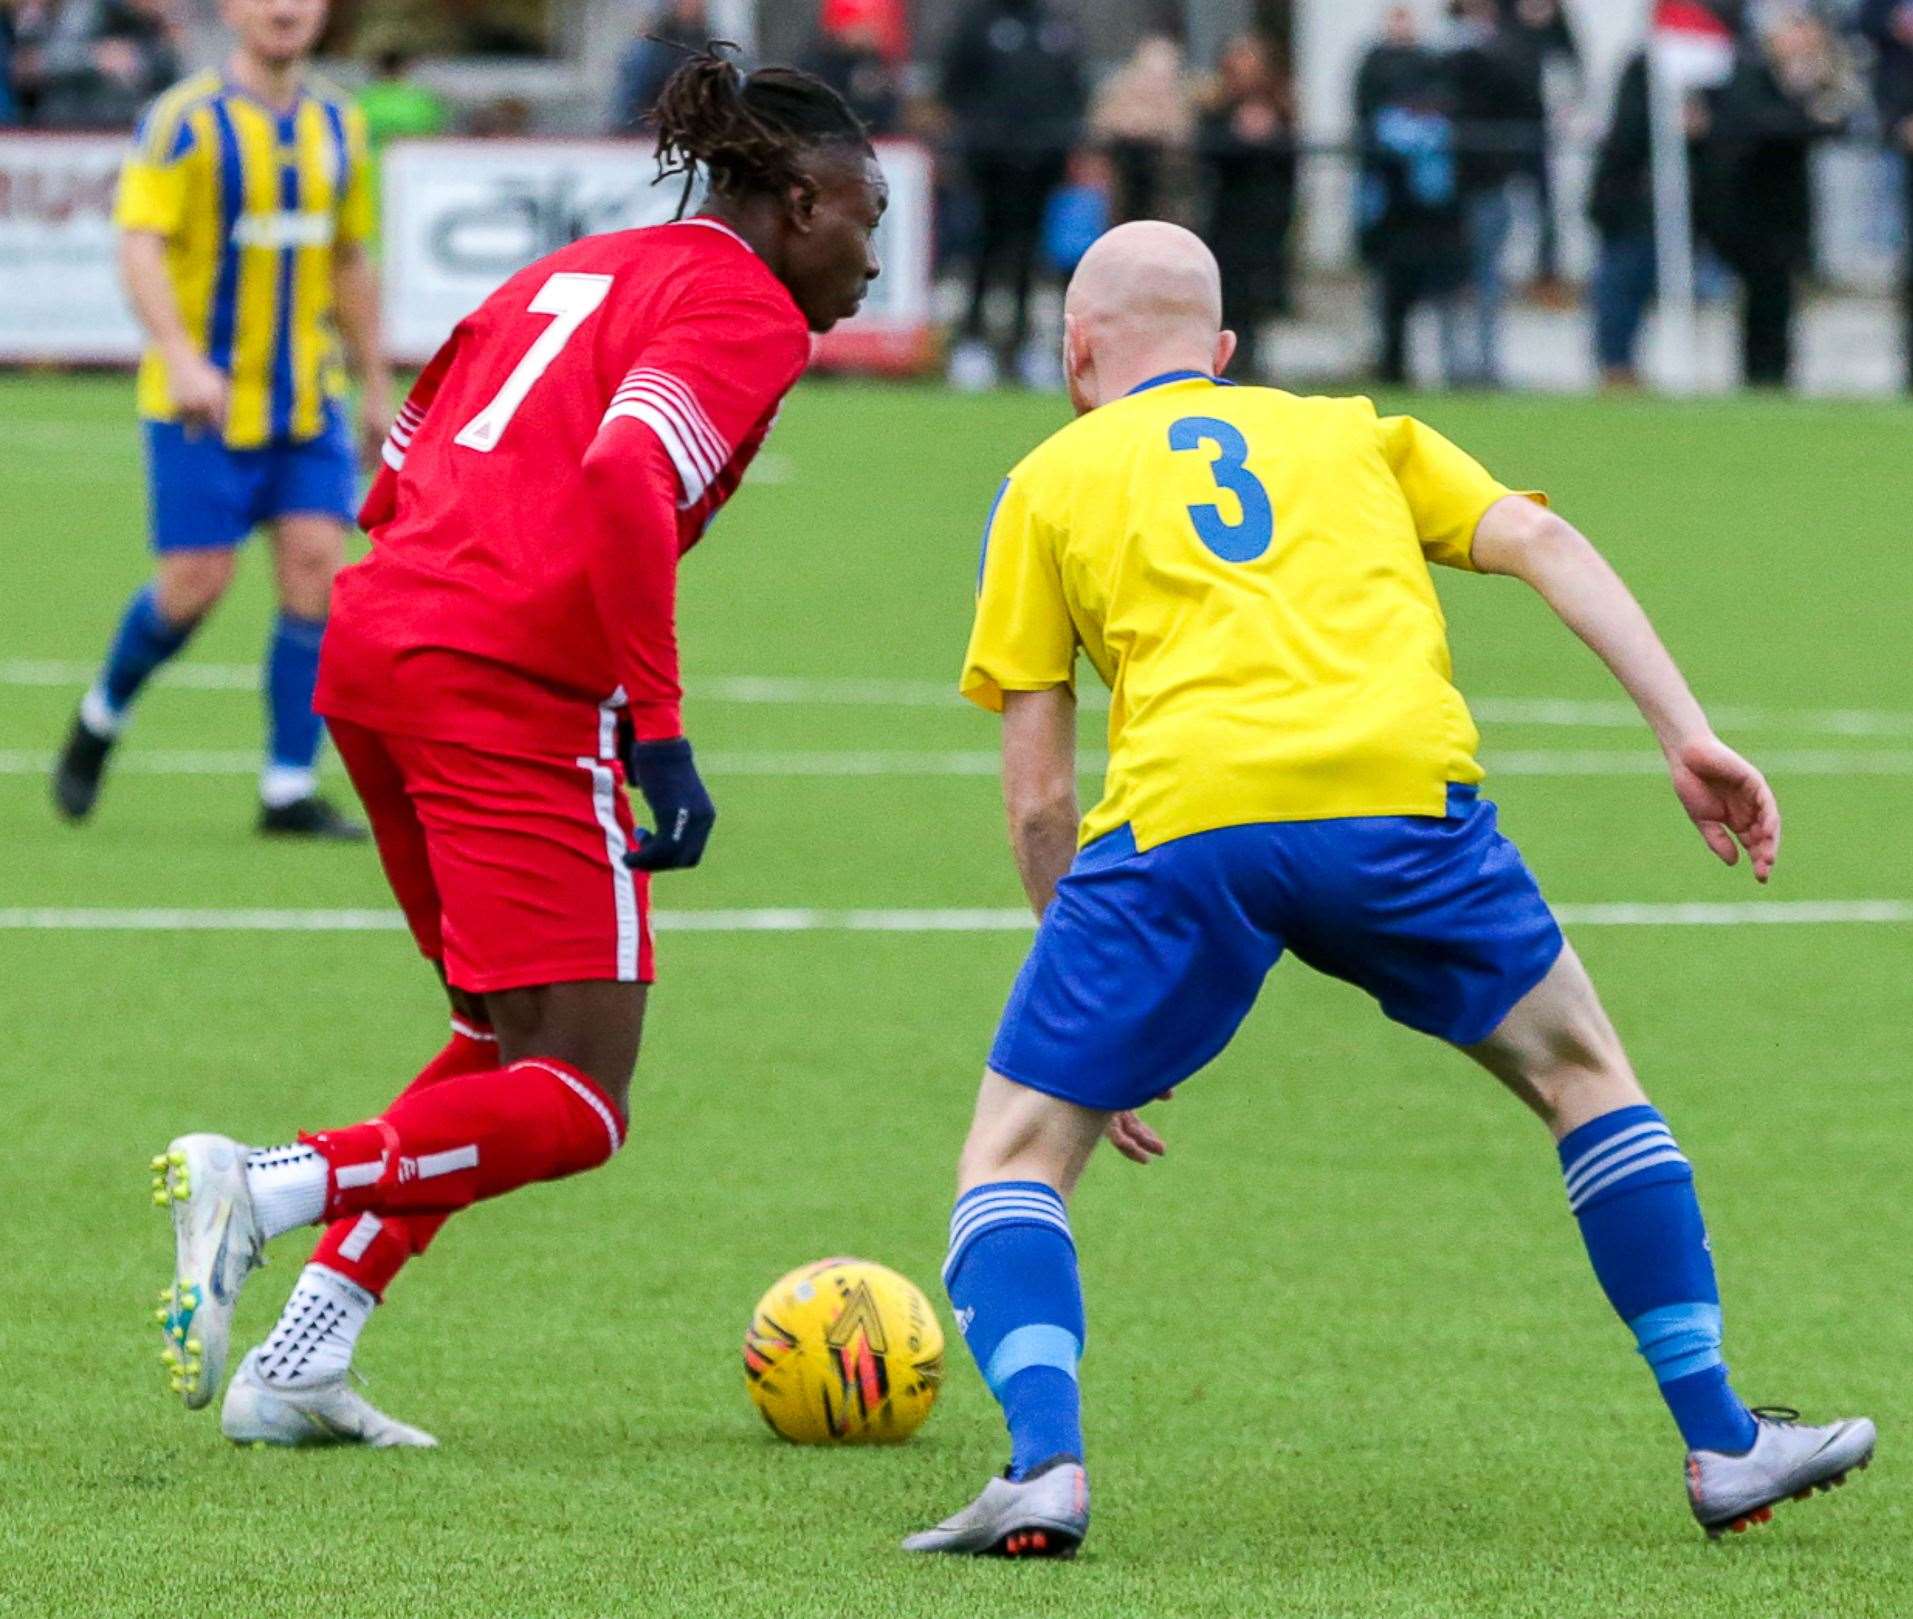 Jefferson Aibangbee going past Stansfeld defender Greg Summersby. Picture: Les Biggs